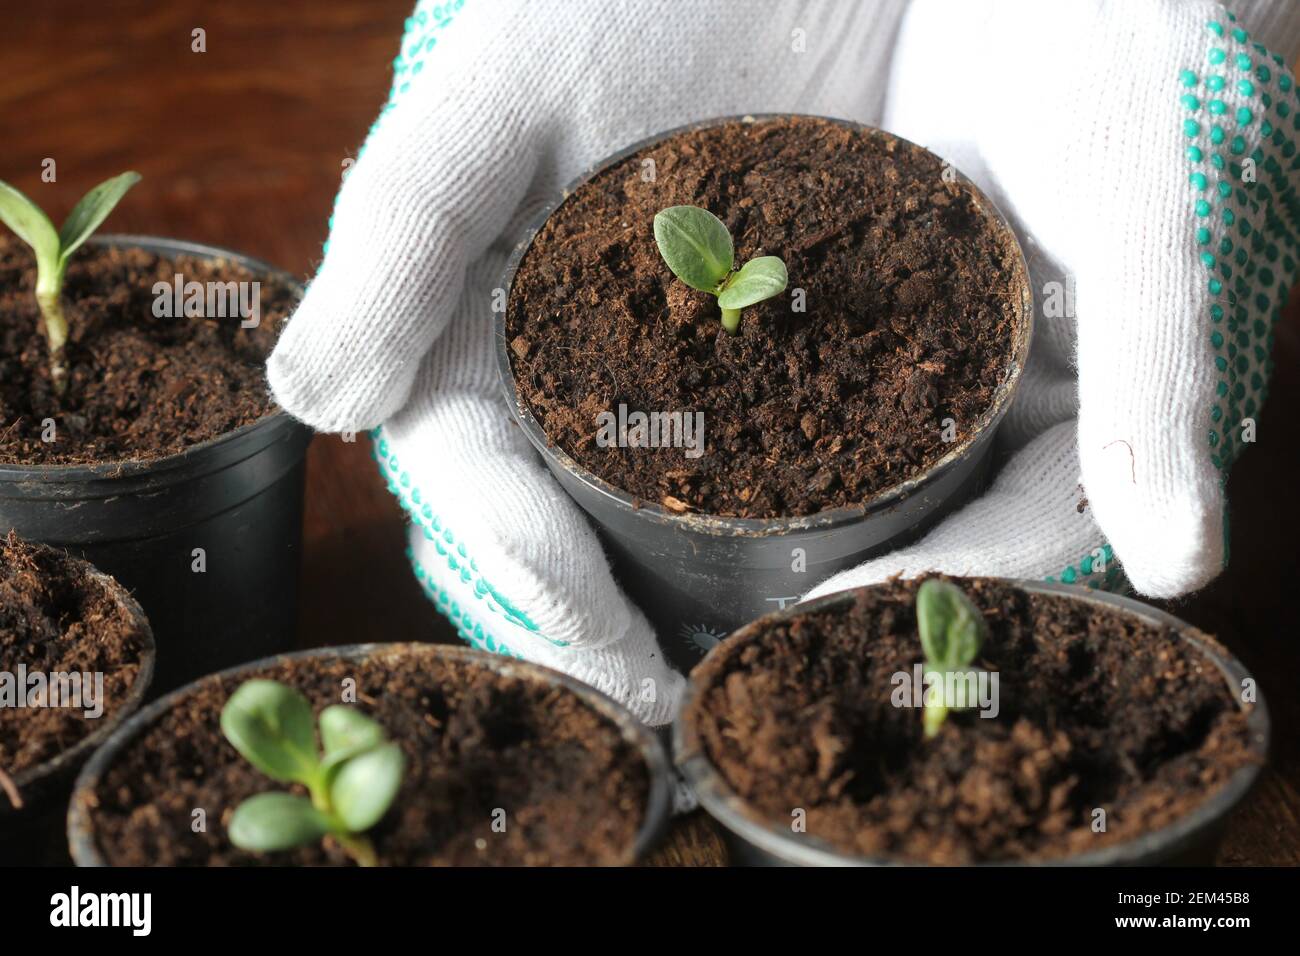 Gardening concept. Young seedling of artichokes growing in pot on windowsill . Hand holding artichoke seedling planted in pot Stock Photo